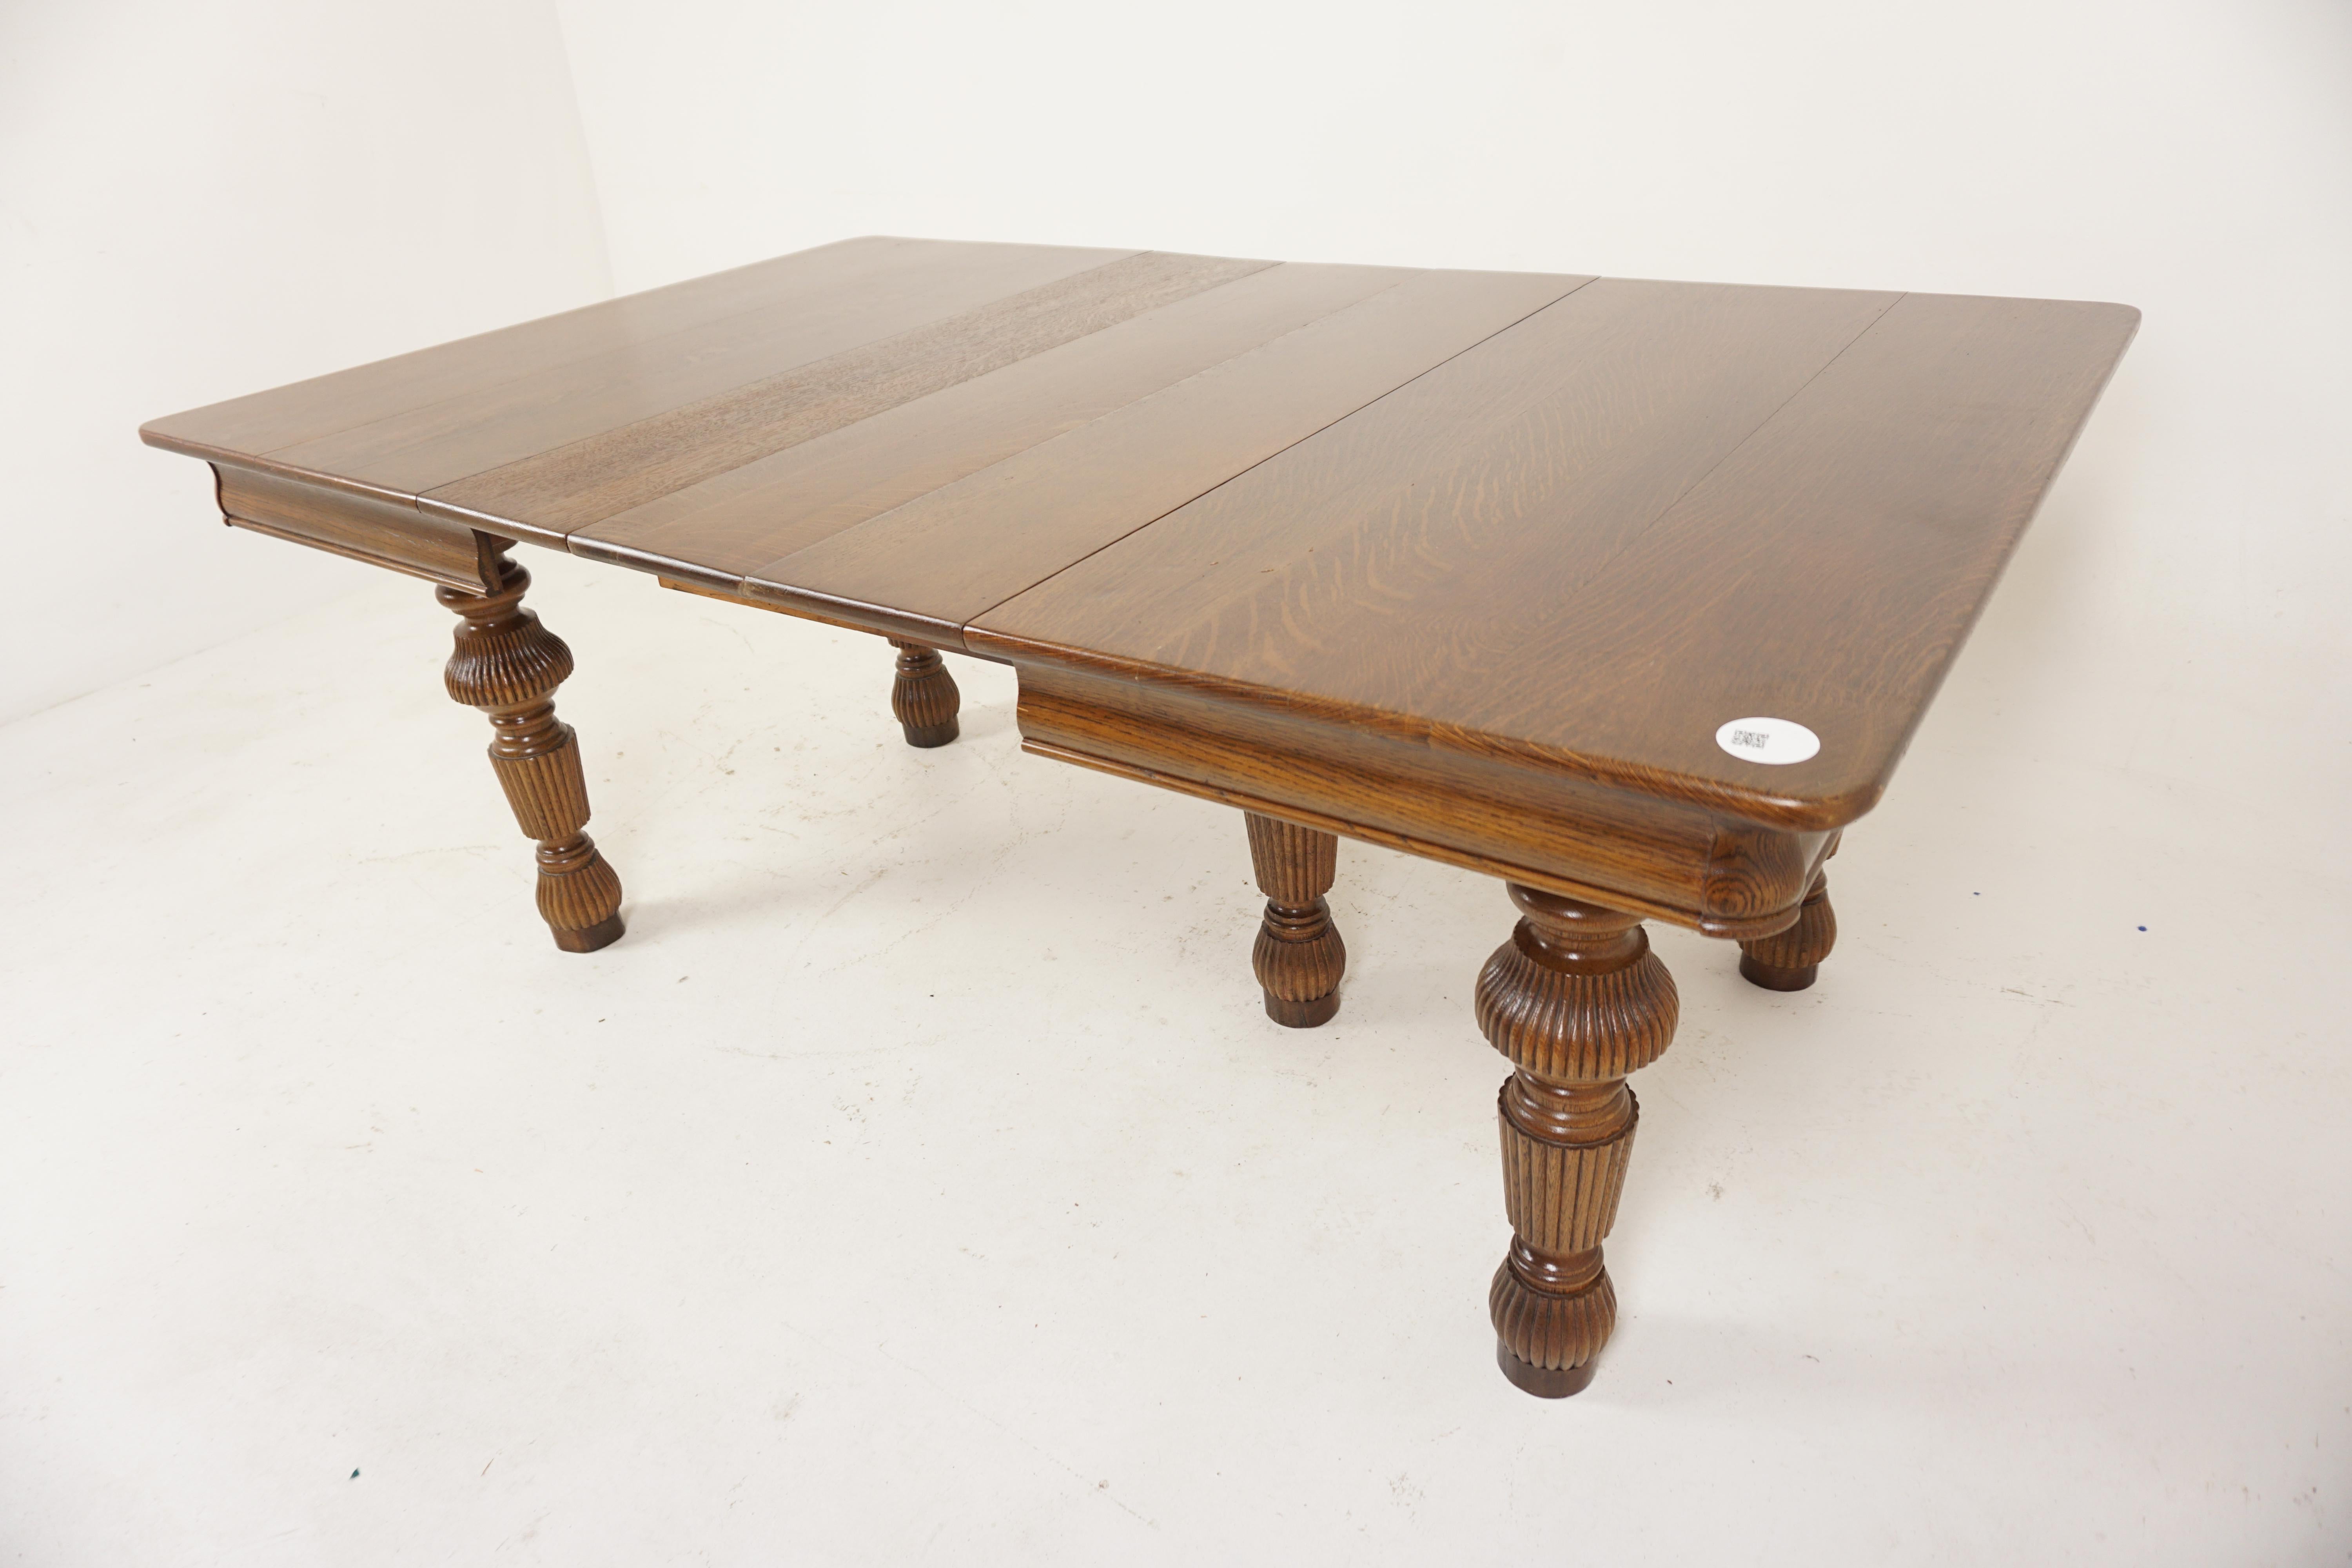 Antique tiger oak dining table, 3 leaves, 5 legs, American 1910, H691

American 1910
Solid Oak
Original Finish
Square top with skirt underneath
Comes with three leaves
Standing on five turned legs
Very good quality and in good condition